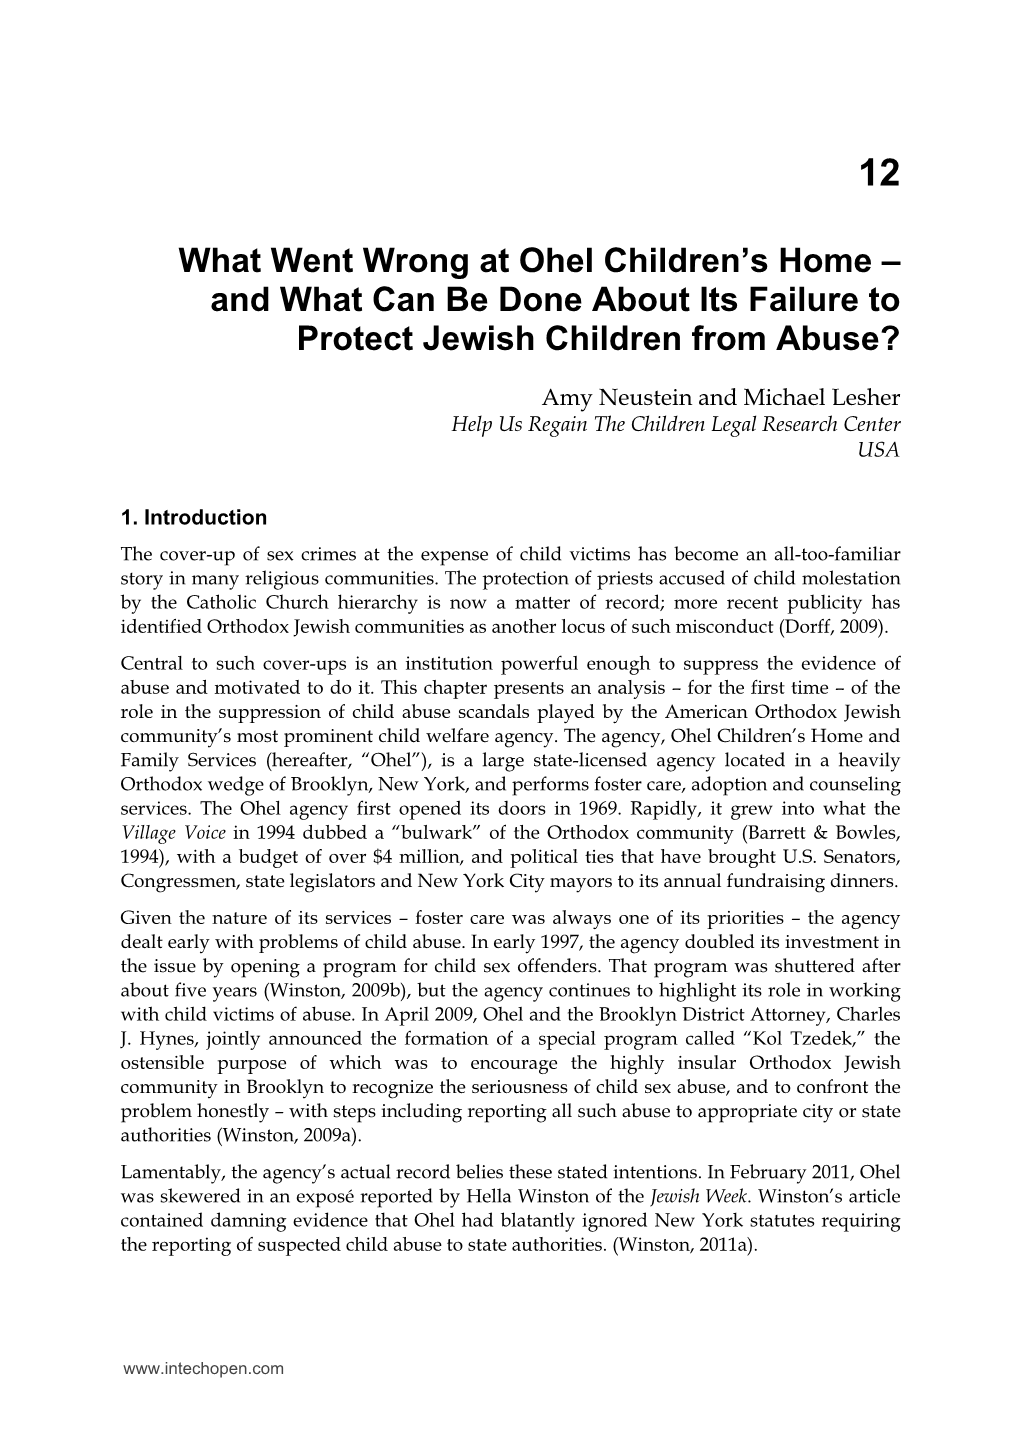 What Went Wrong at Ohel Children's Home - and What Can Be Done About Its Failure to Protect Jewish Children from Abuse?, Sexual Abuse - Breaking the Silence, Dr